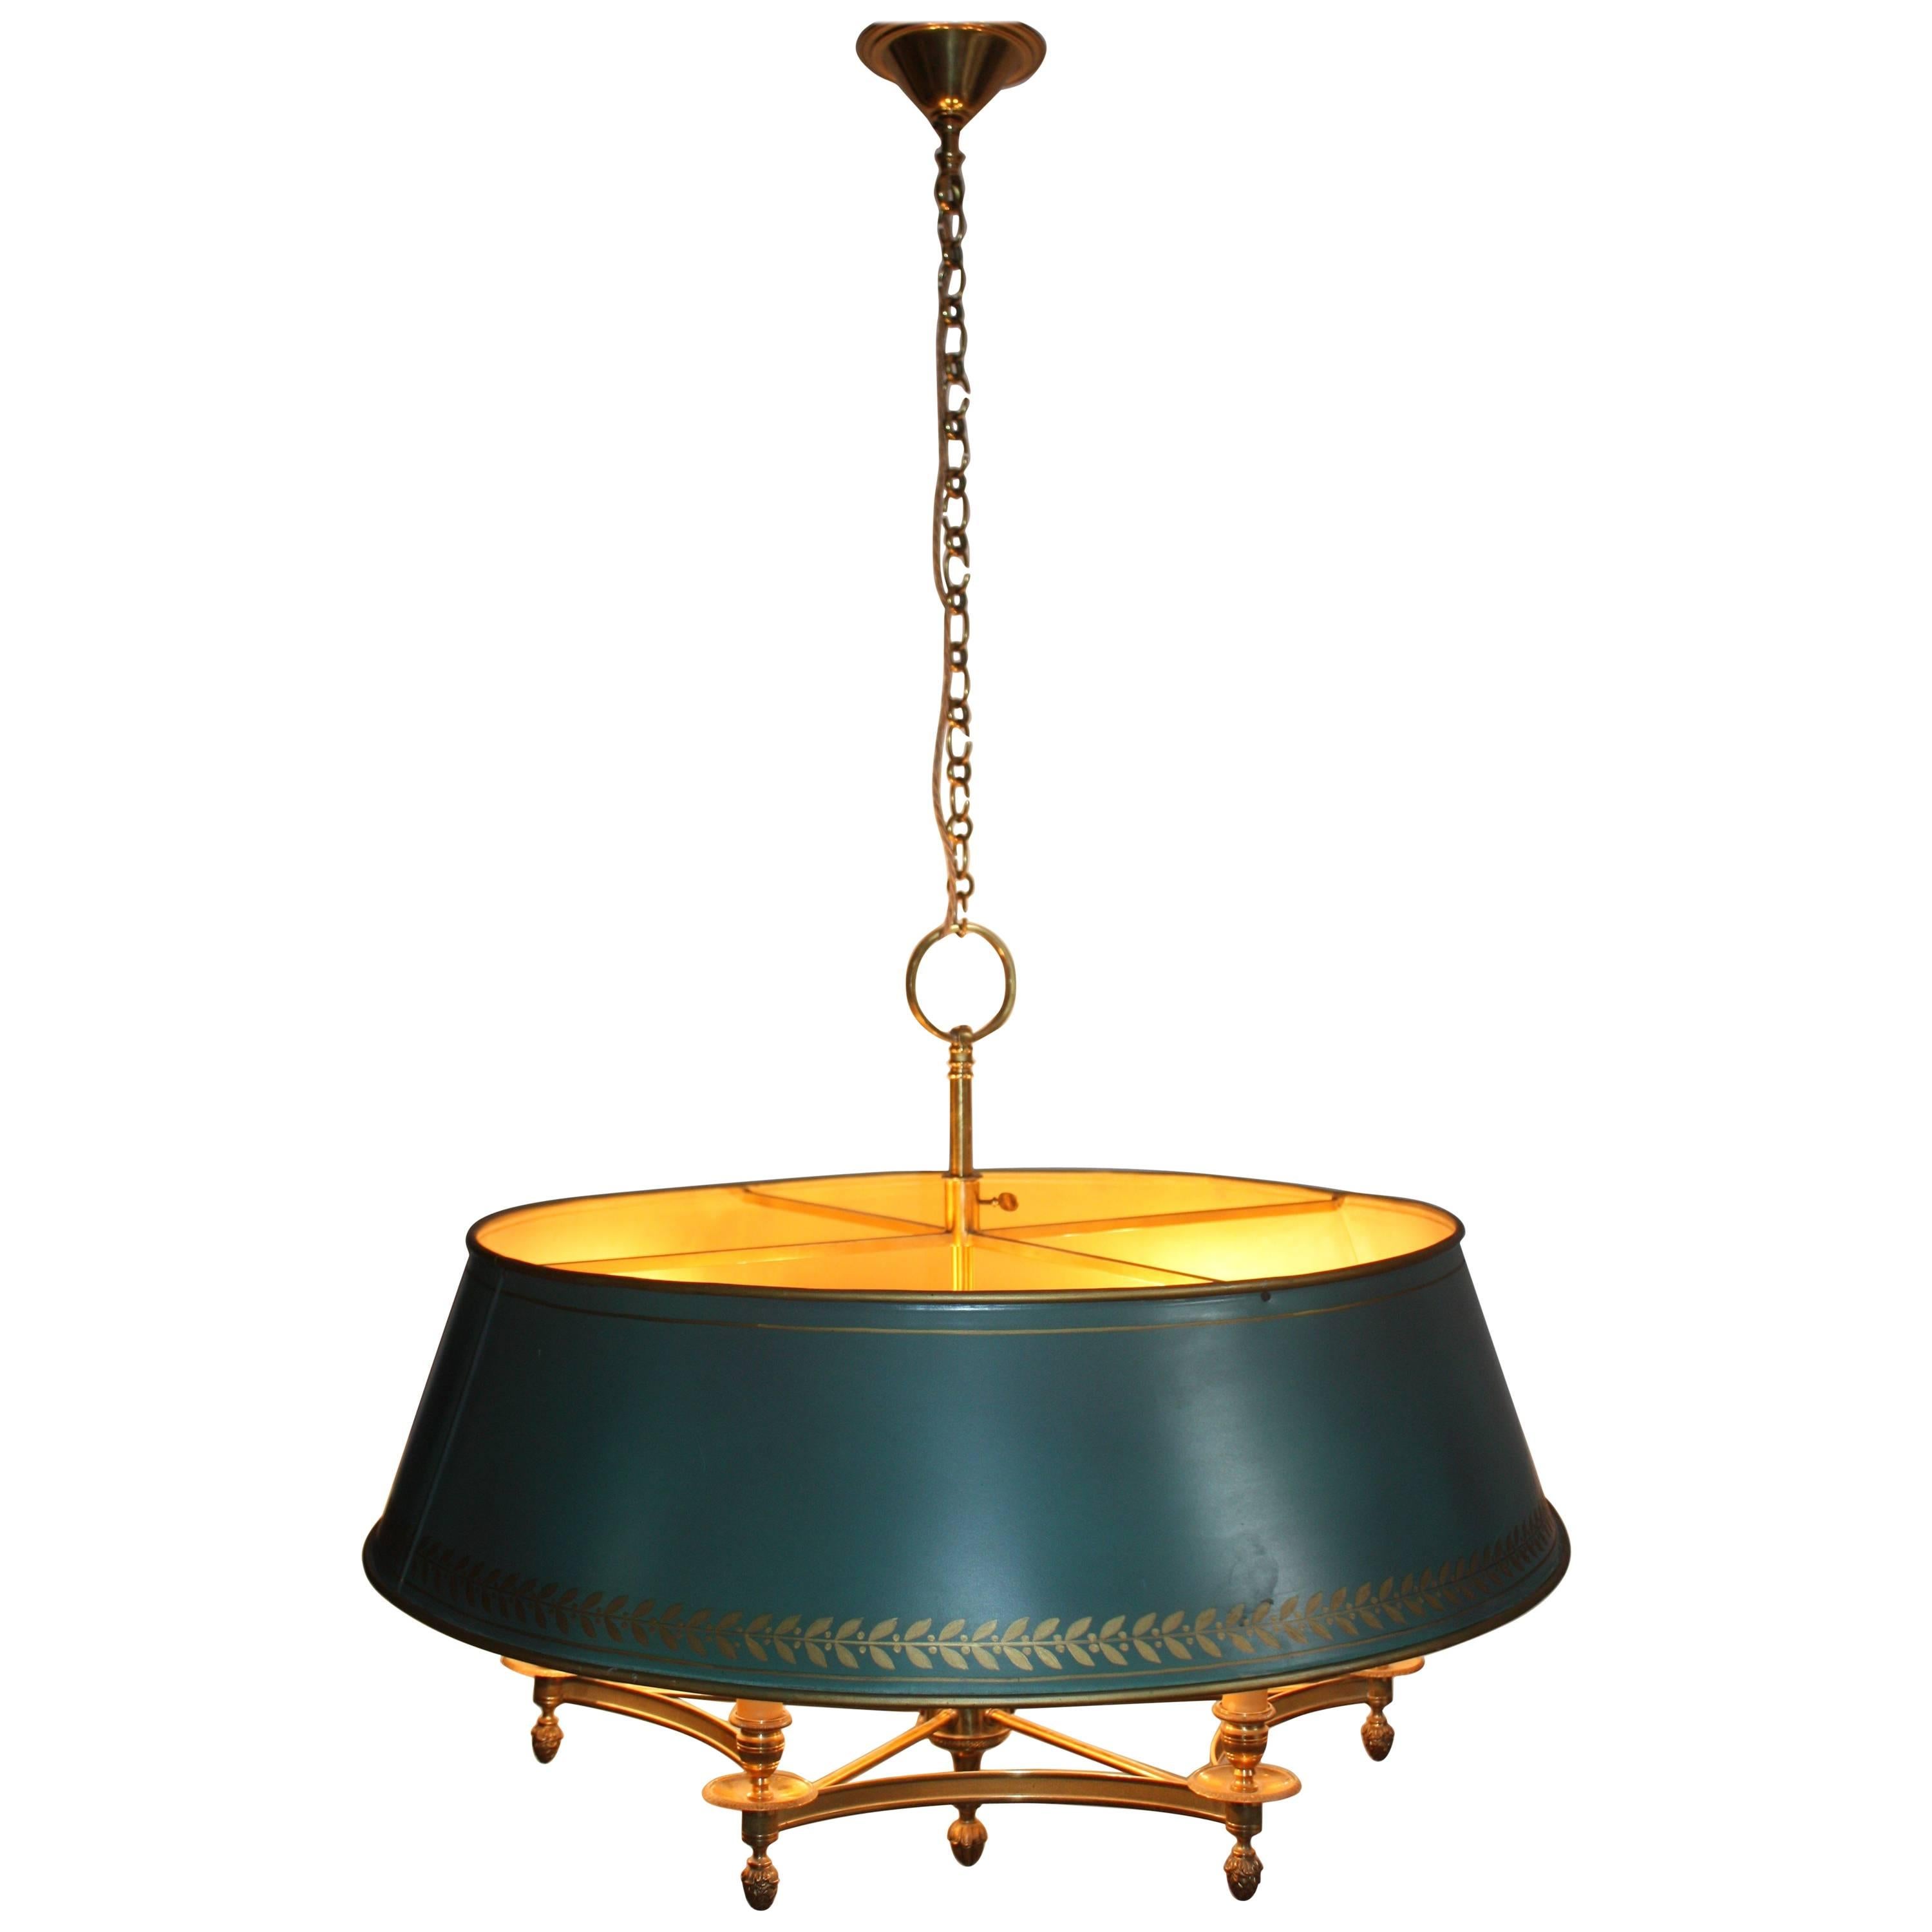 Extra Large "Bouillotte" Brass Pendant, Empire Style Chandelier, France